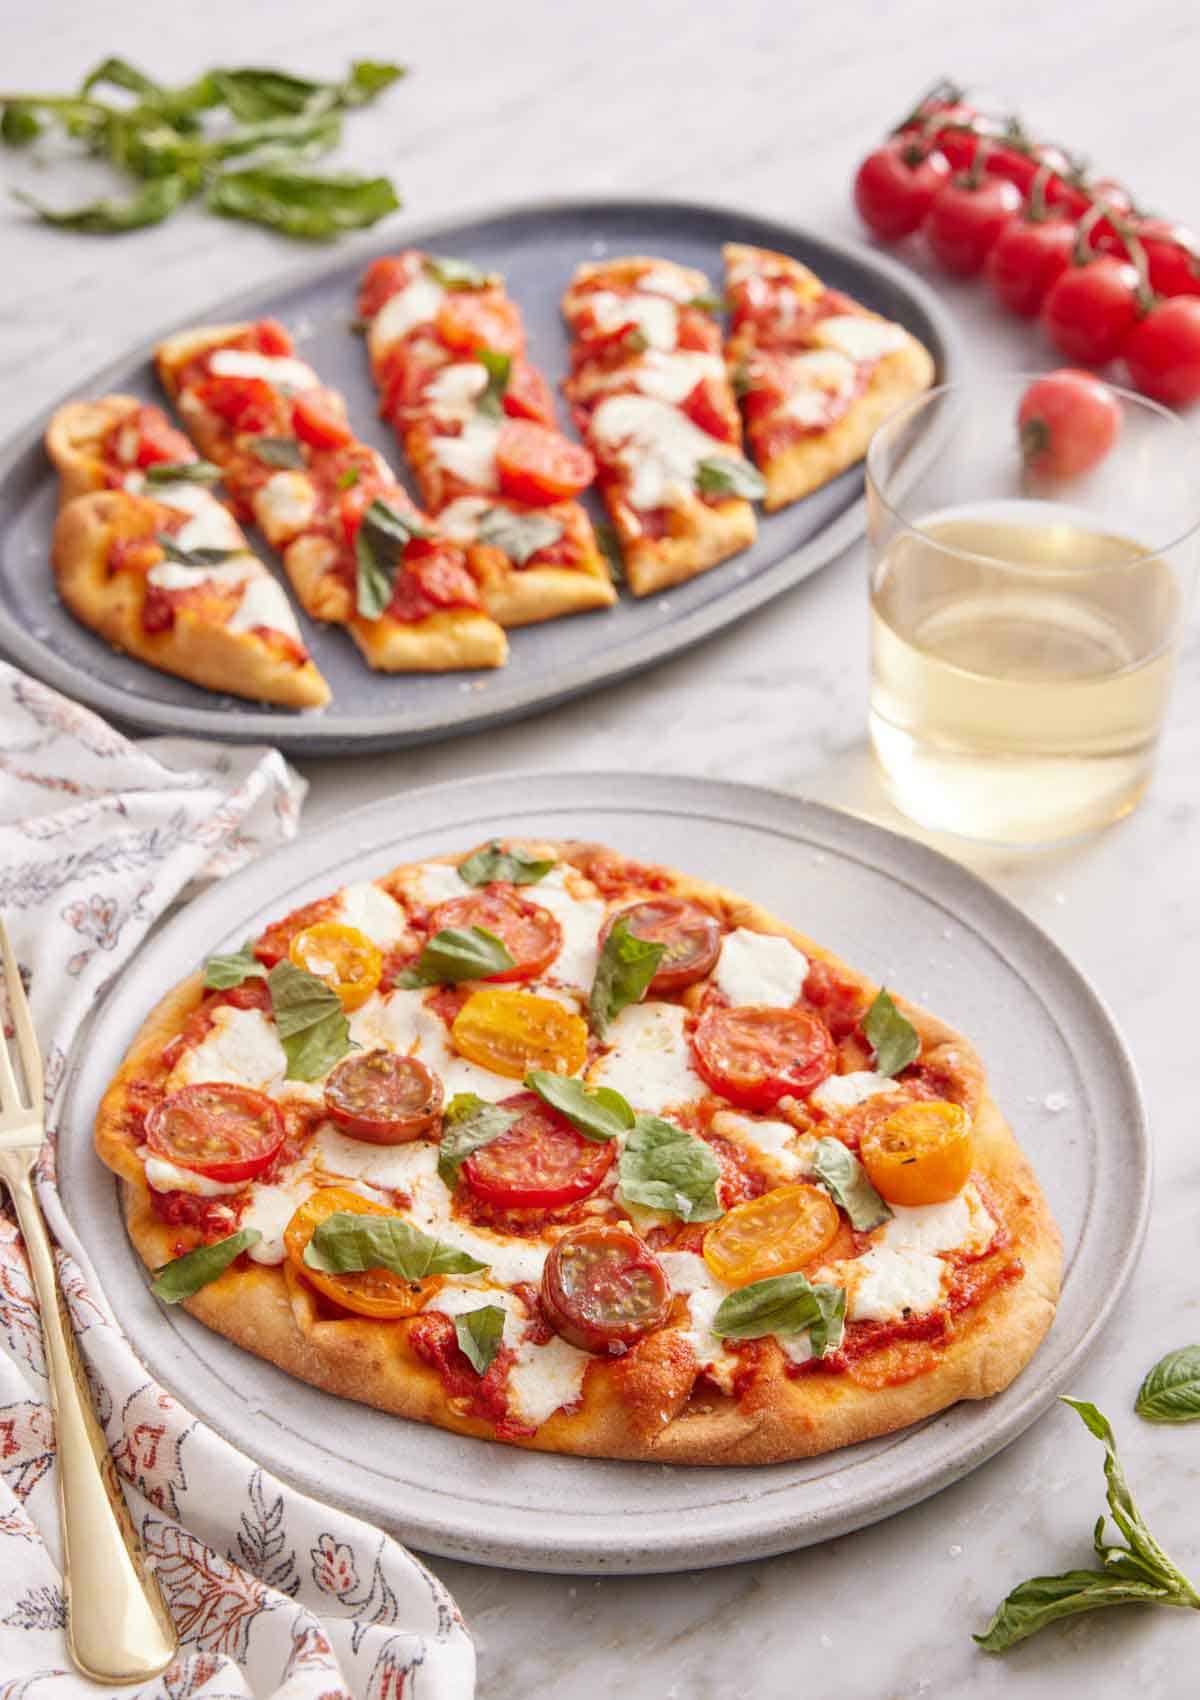 A plate with a flatbread pizza with a second plate in the background, cut into long slices. Glass of wine, tomatoes, and basil scattered around.